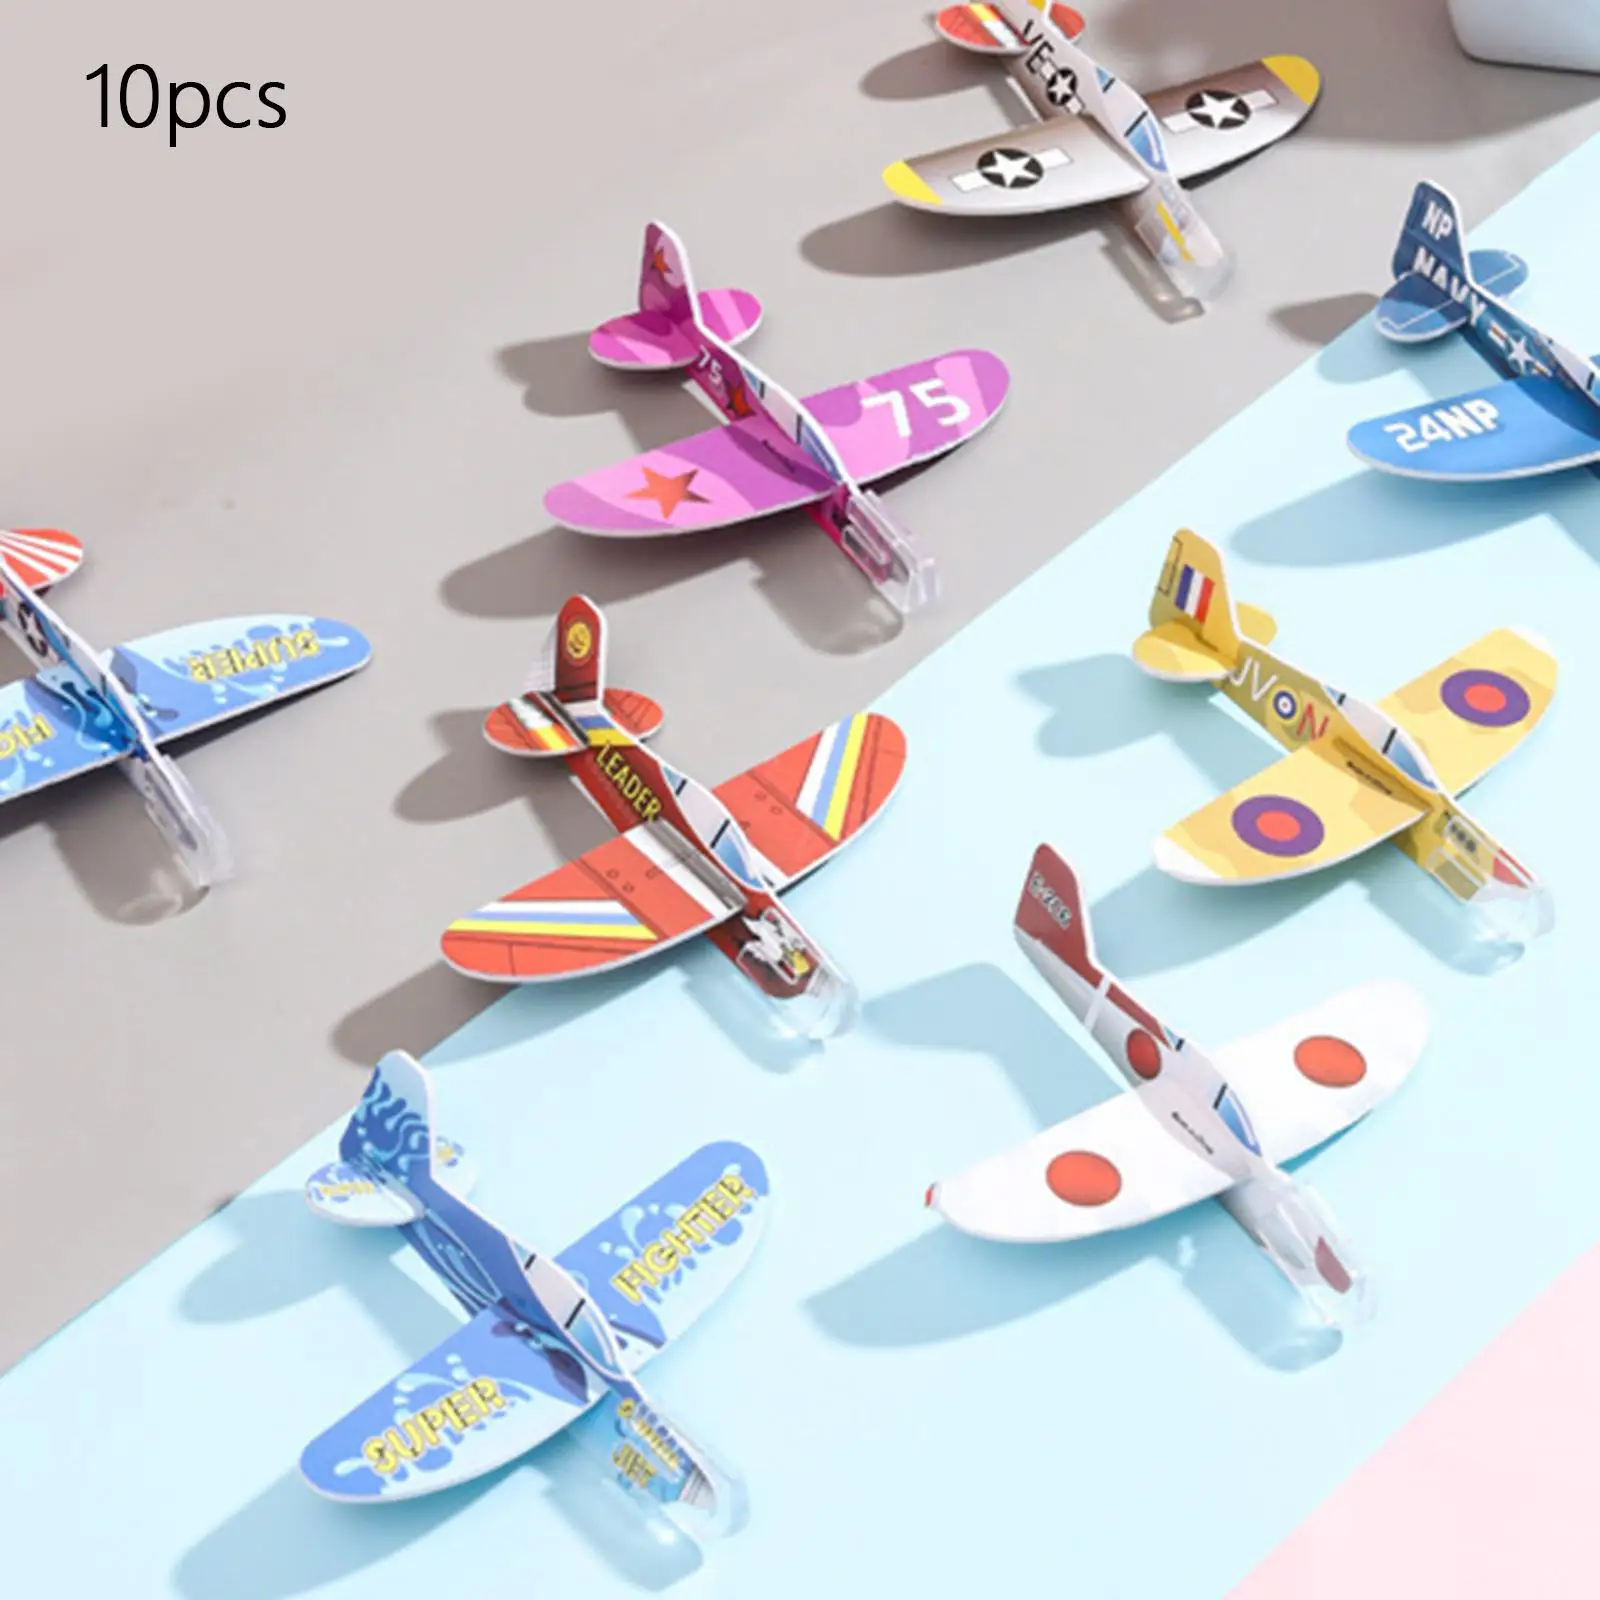 

10Pcs Foam Gliders Planes Toys Throwing Foam Plane Lightweight Party Favors Durable Mini Foam Airplane Toys 3 4 5 6 7 Year Old